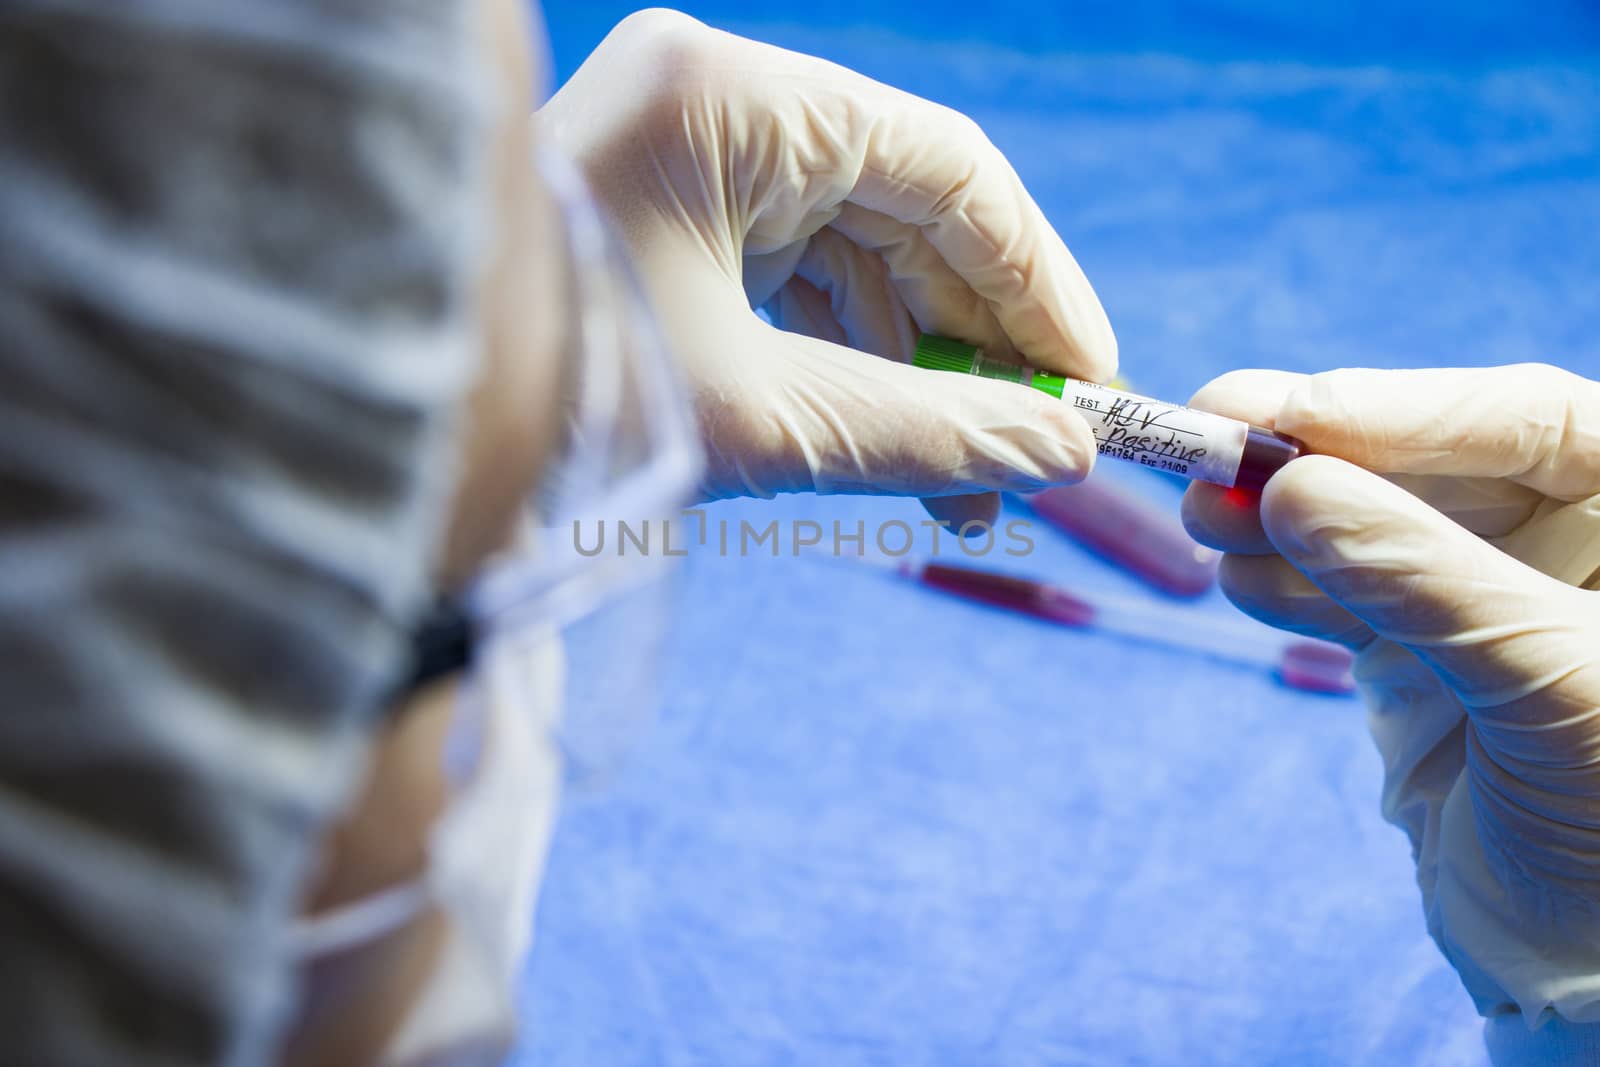 Hiv and aids infection test, doctors face and hand holding tube with blood on the blue background. by Taidundua